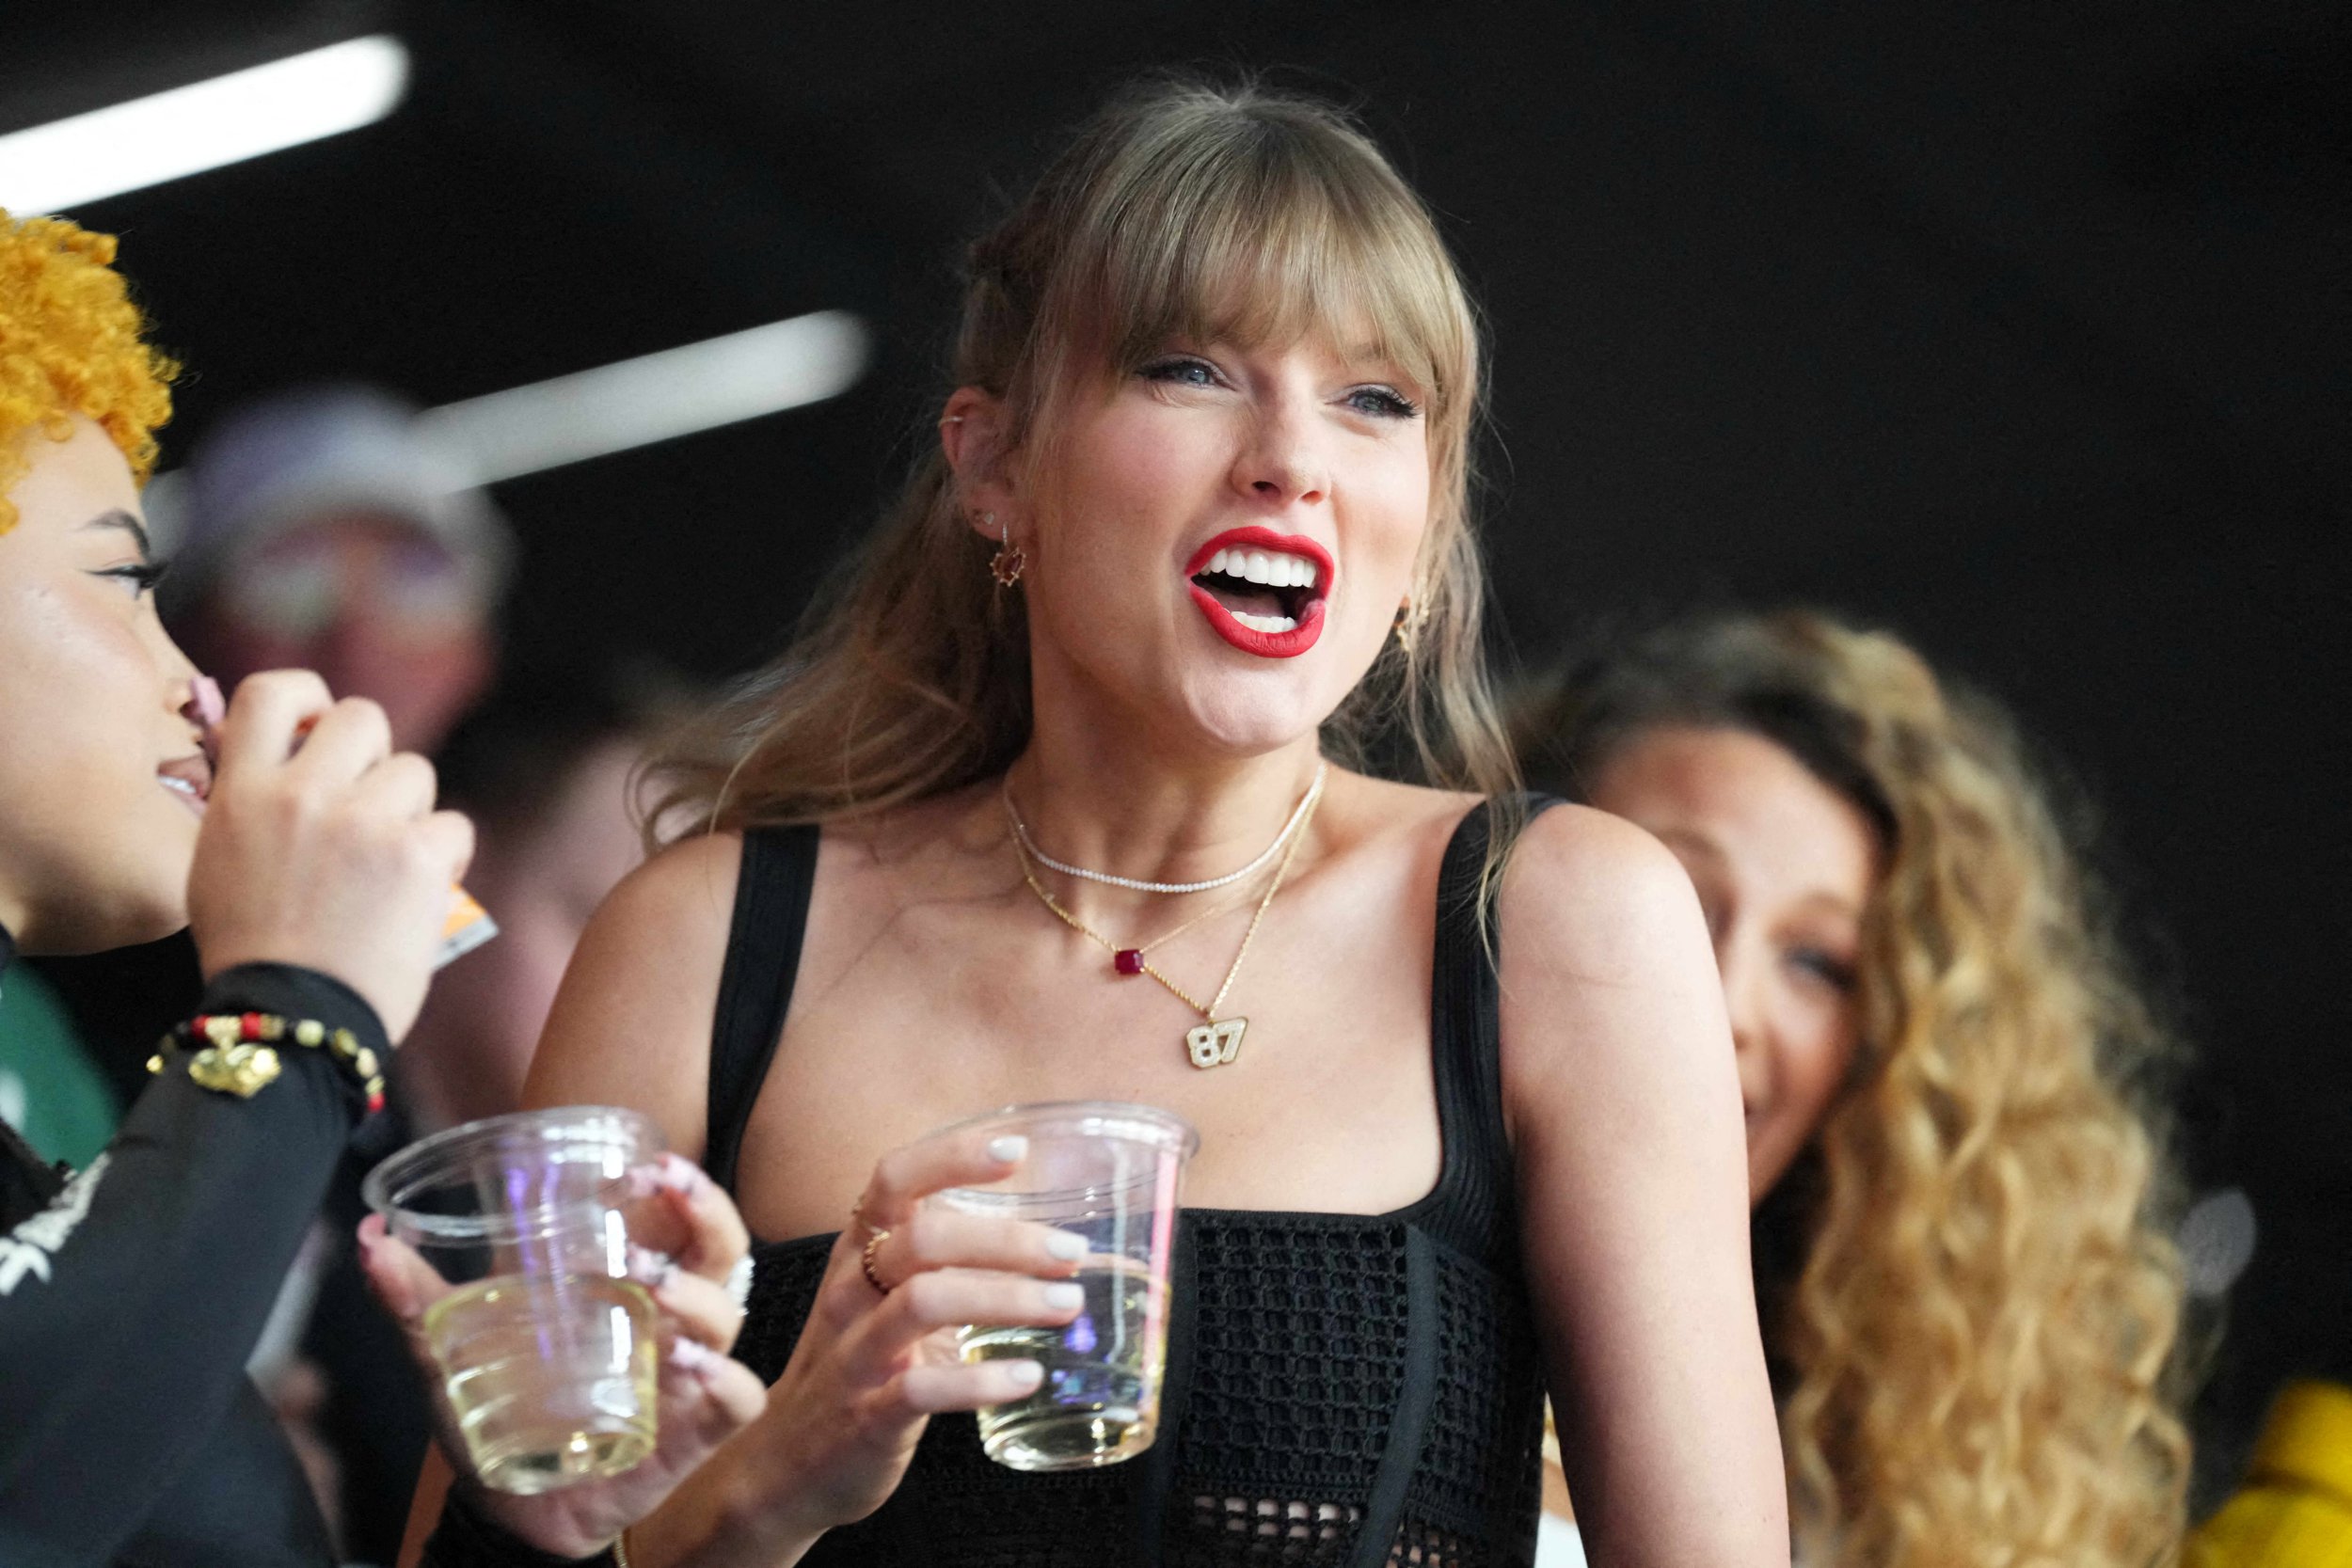 Taylor Swift Fires Back at Critics Over Her Drinking Habit: "What I Do With My Life is Nobody's Business, Bunch of Losers"